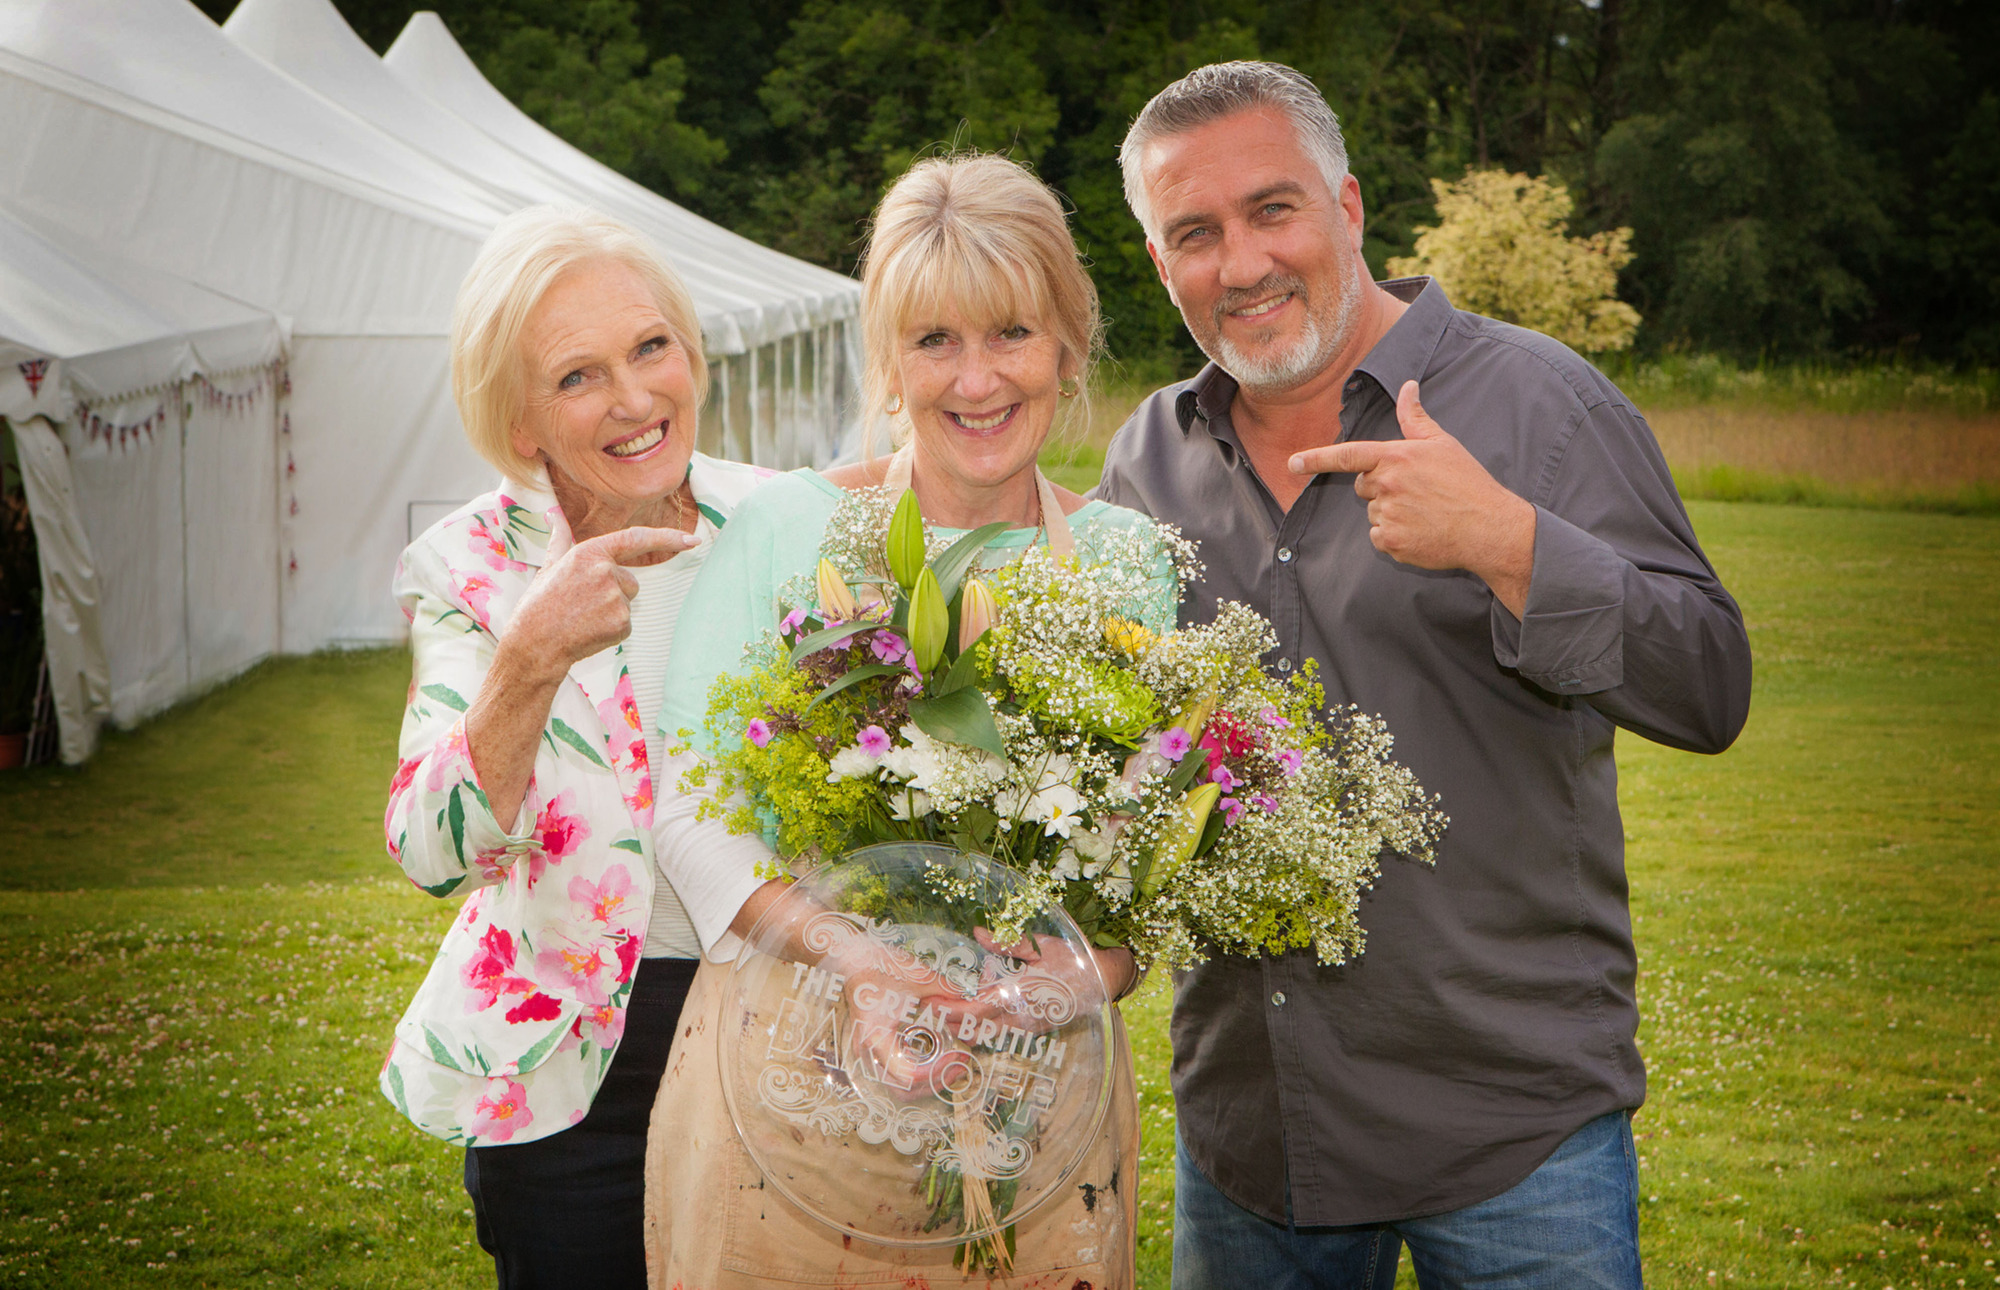 Mary Berry, Nancy Birtwhistle and Paul Hollywood in The Great British Bake Off